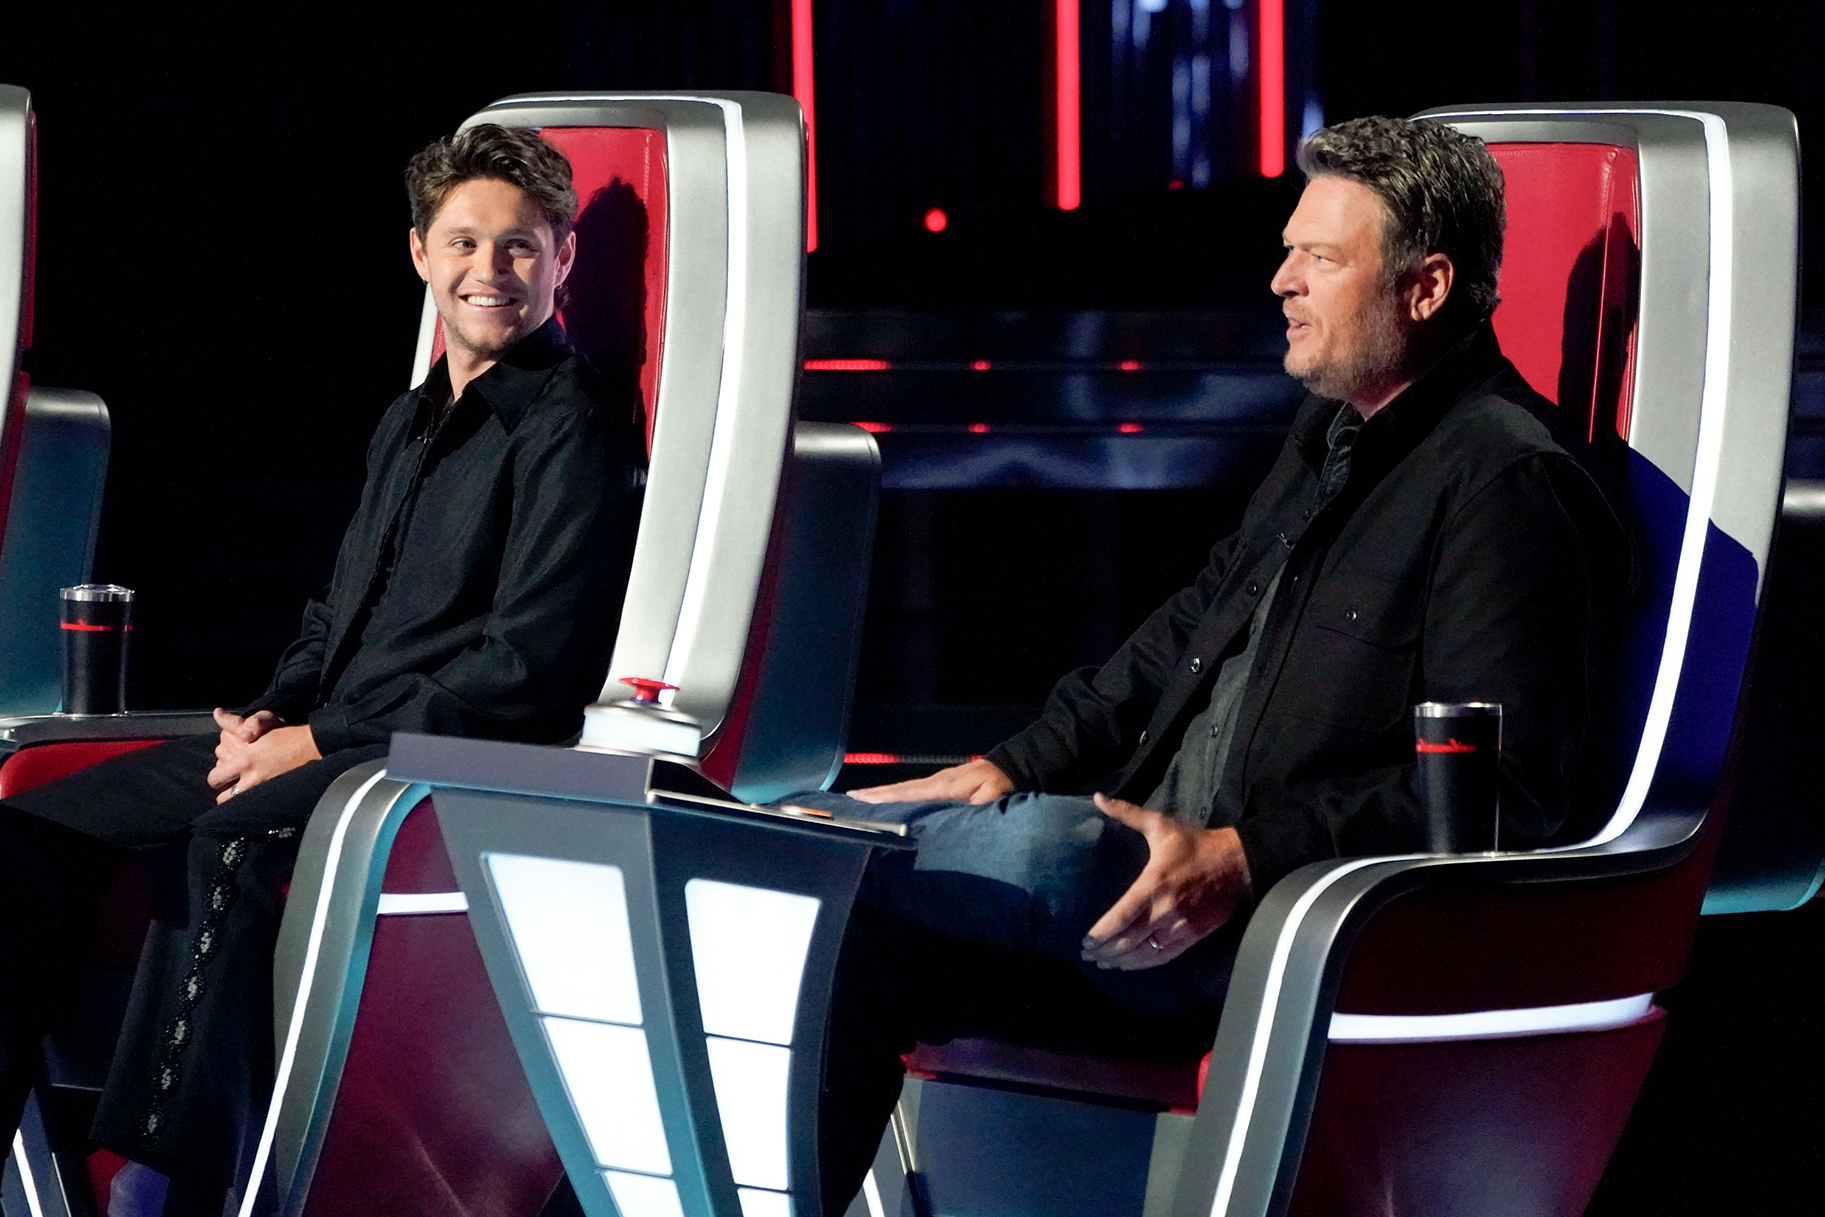 Blake Shelton and Niall Horan on The Voice Blind Auditions Part 3